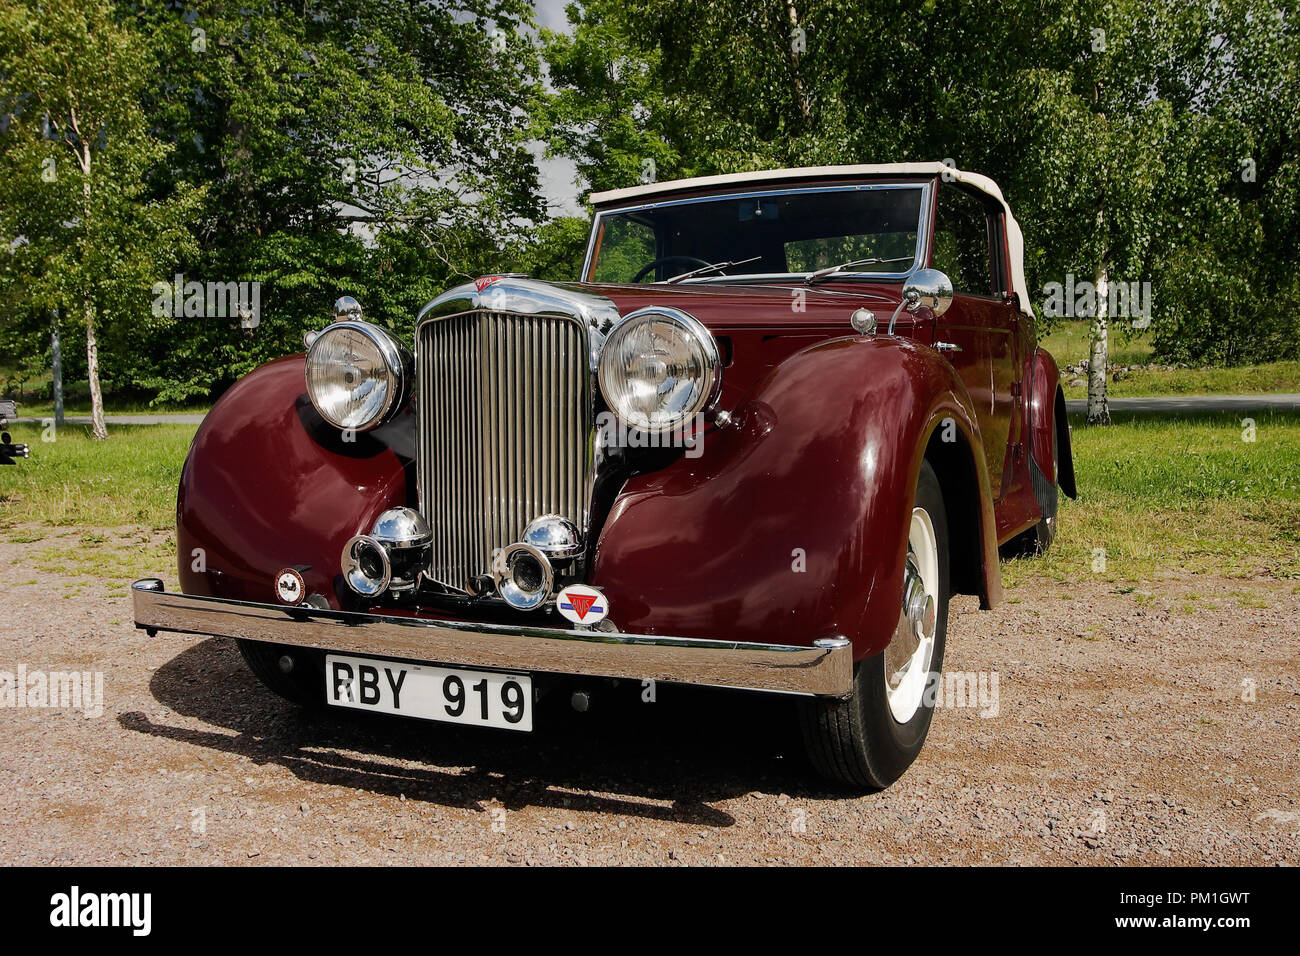 Rottle, Sweden - July 4, 2004: Front view of a wine red 1949 Alvis Ta 14 drophead cabriolet. Stock Photo